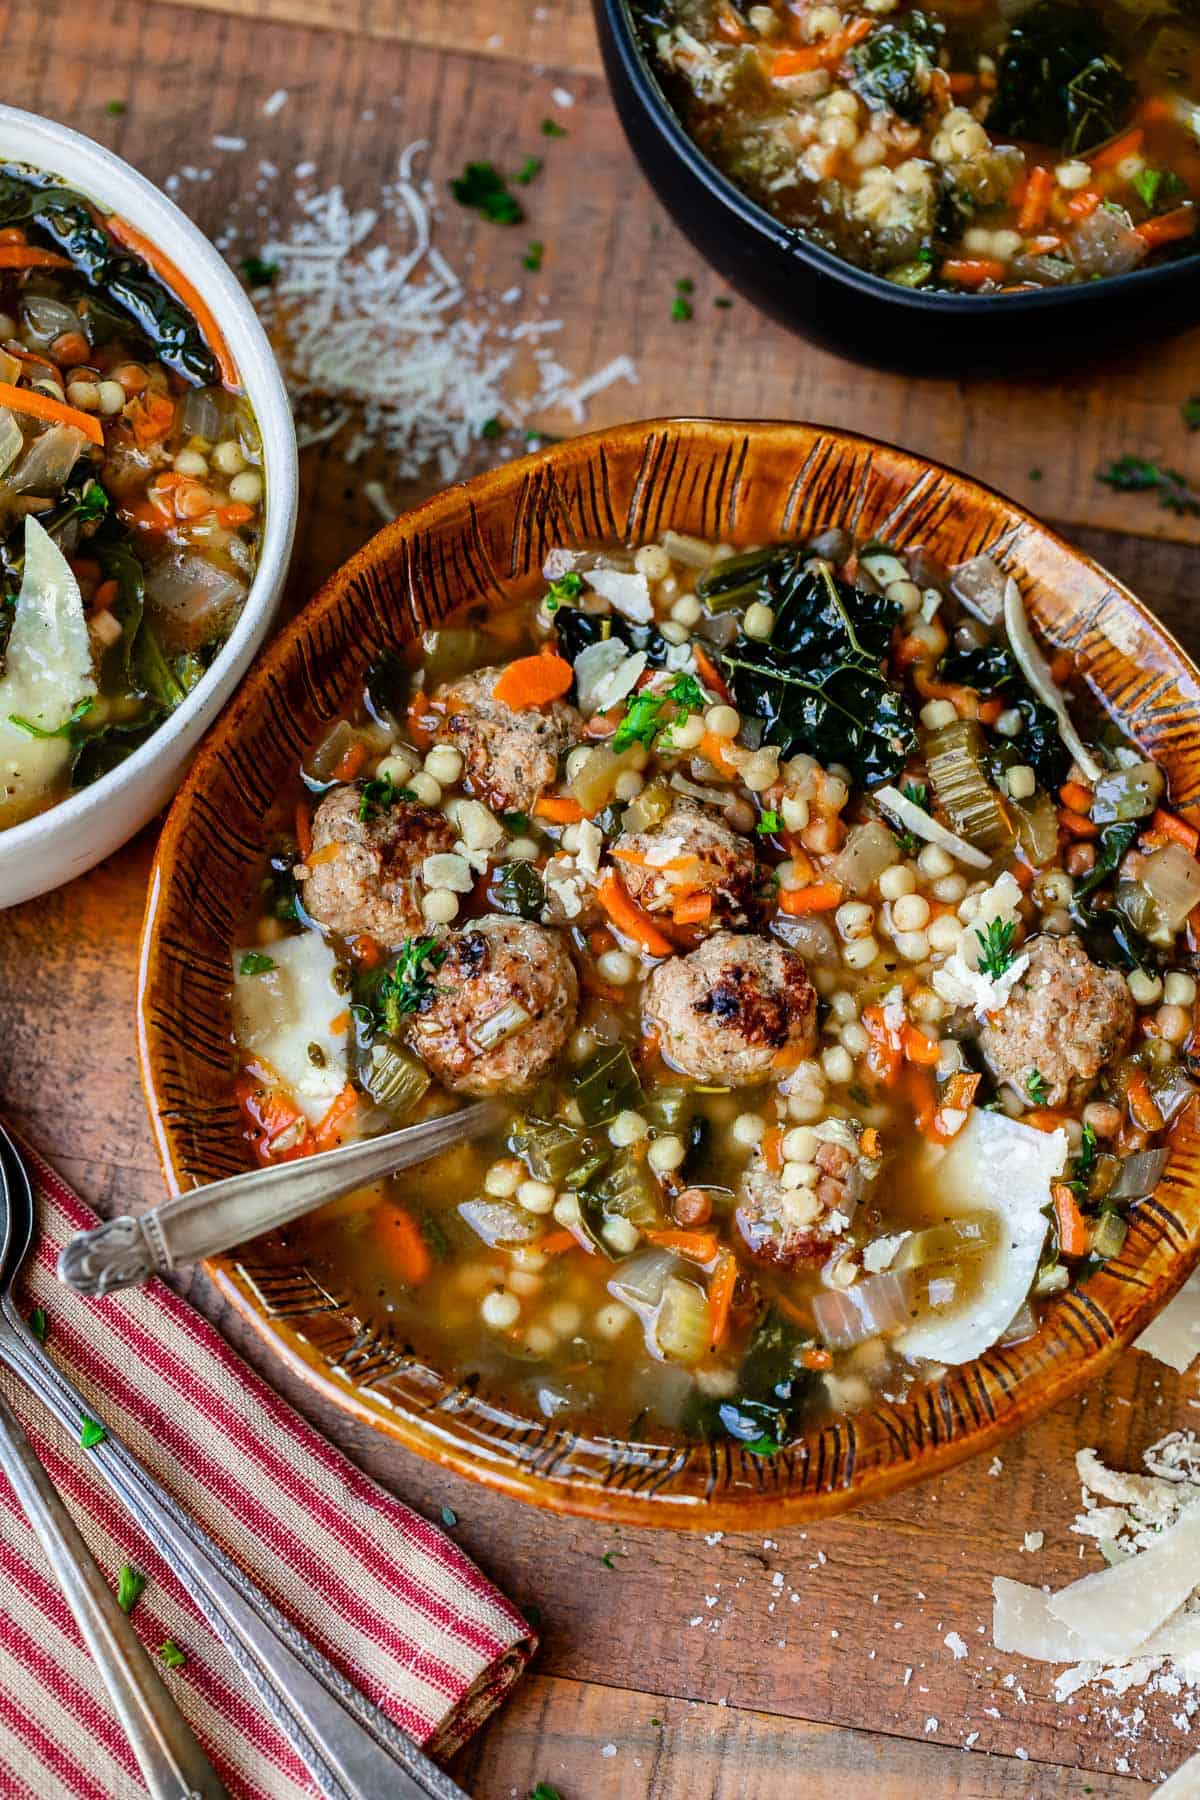 ceramic bowl on cutting board filled with italian wedding soup of greens, meatballs, pasta, and broth.